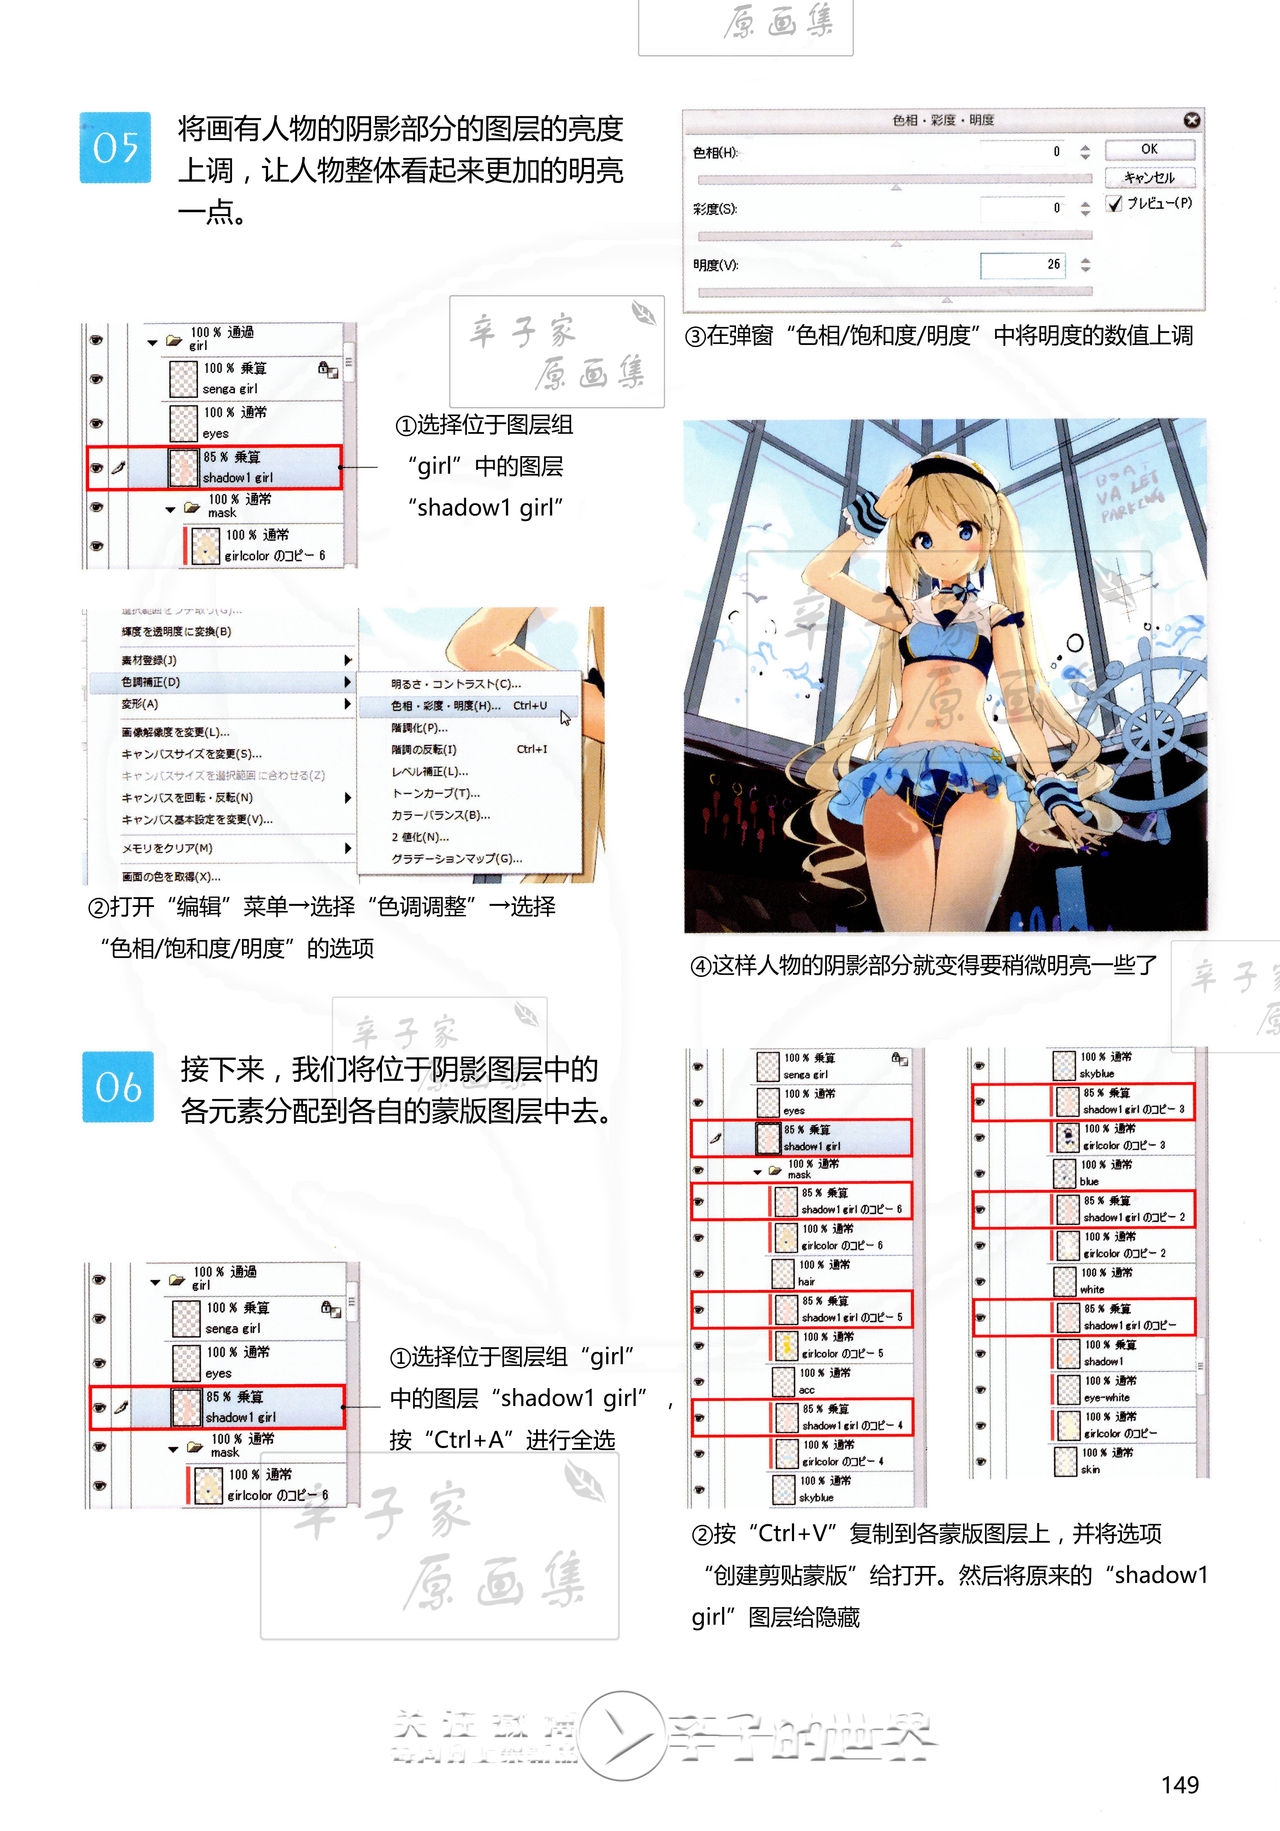 [Anmi] Lets Make ★ Character CG illustration techniques vol.9 [Chinese] 147